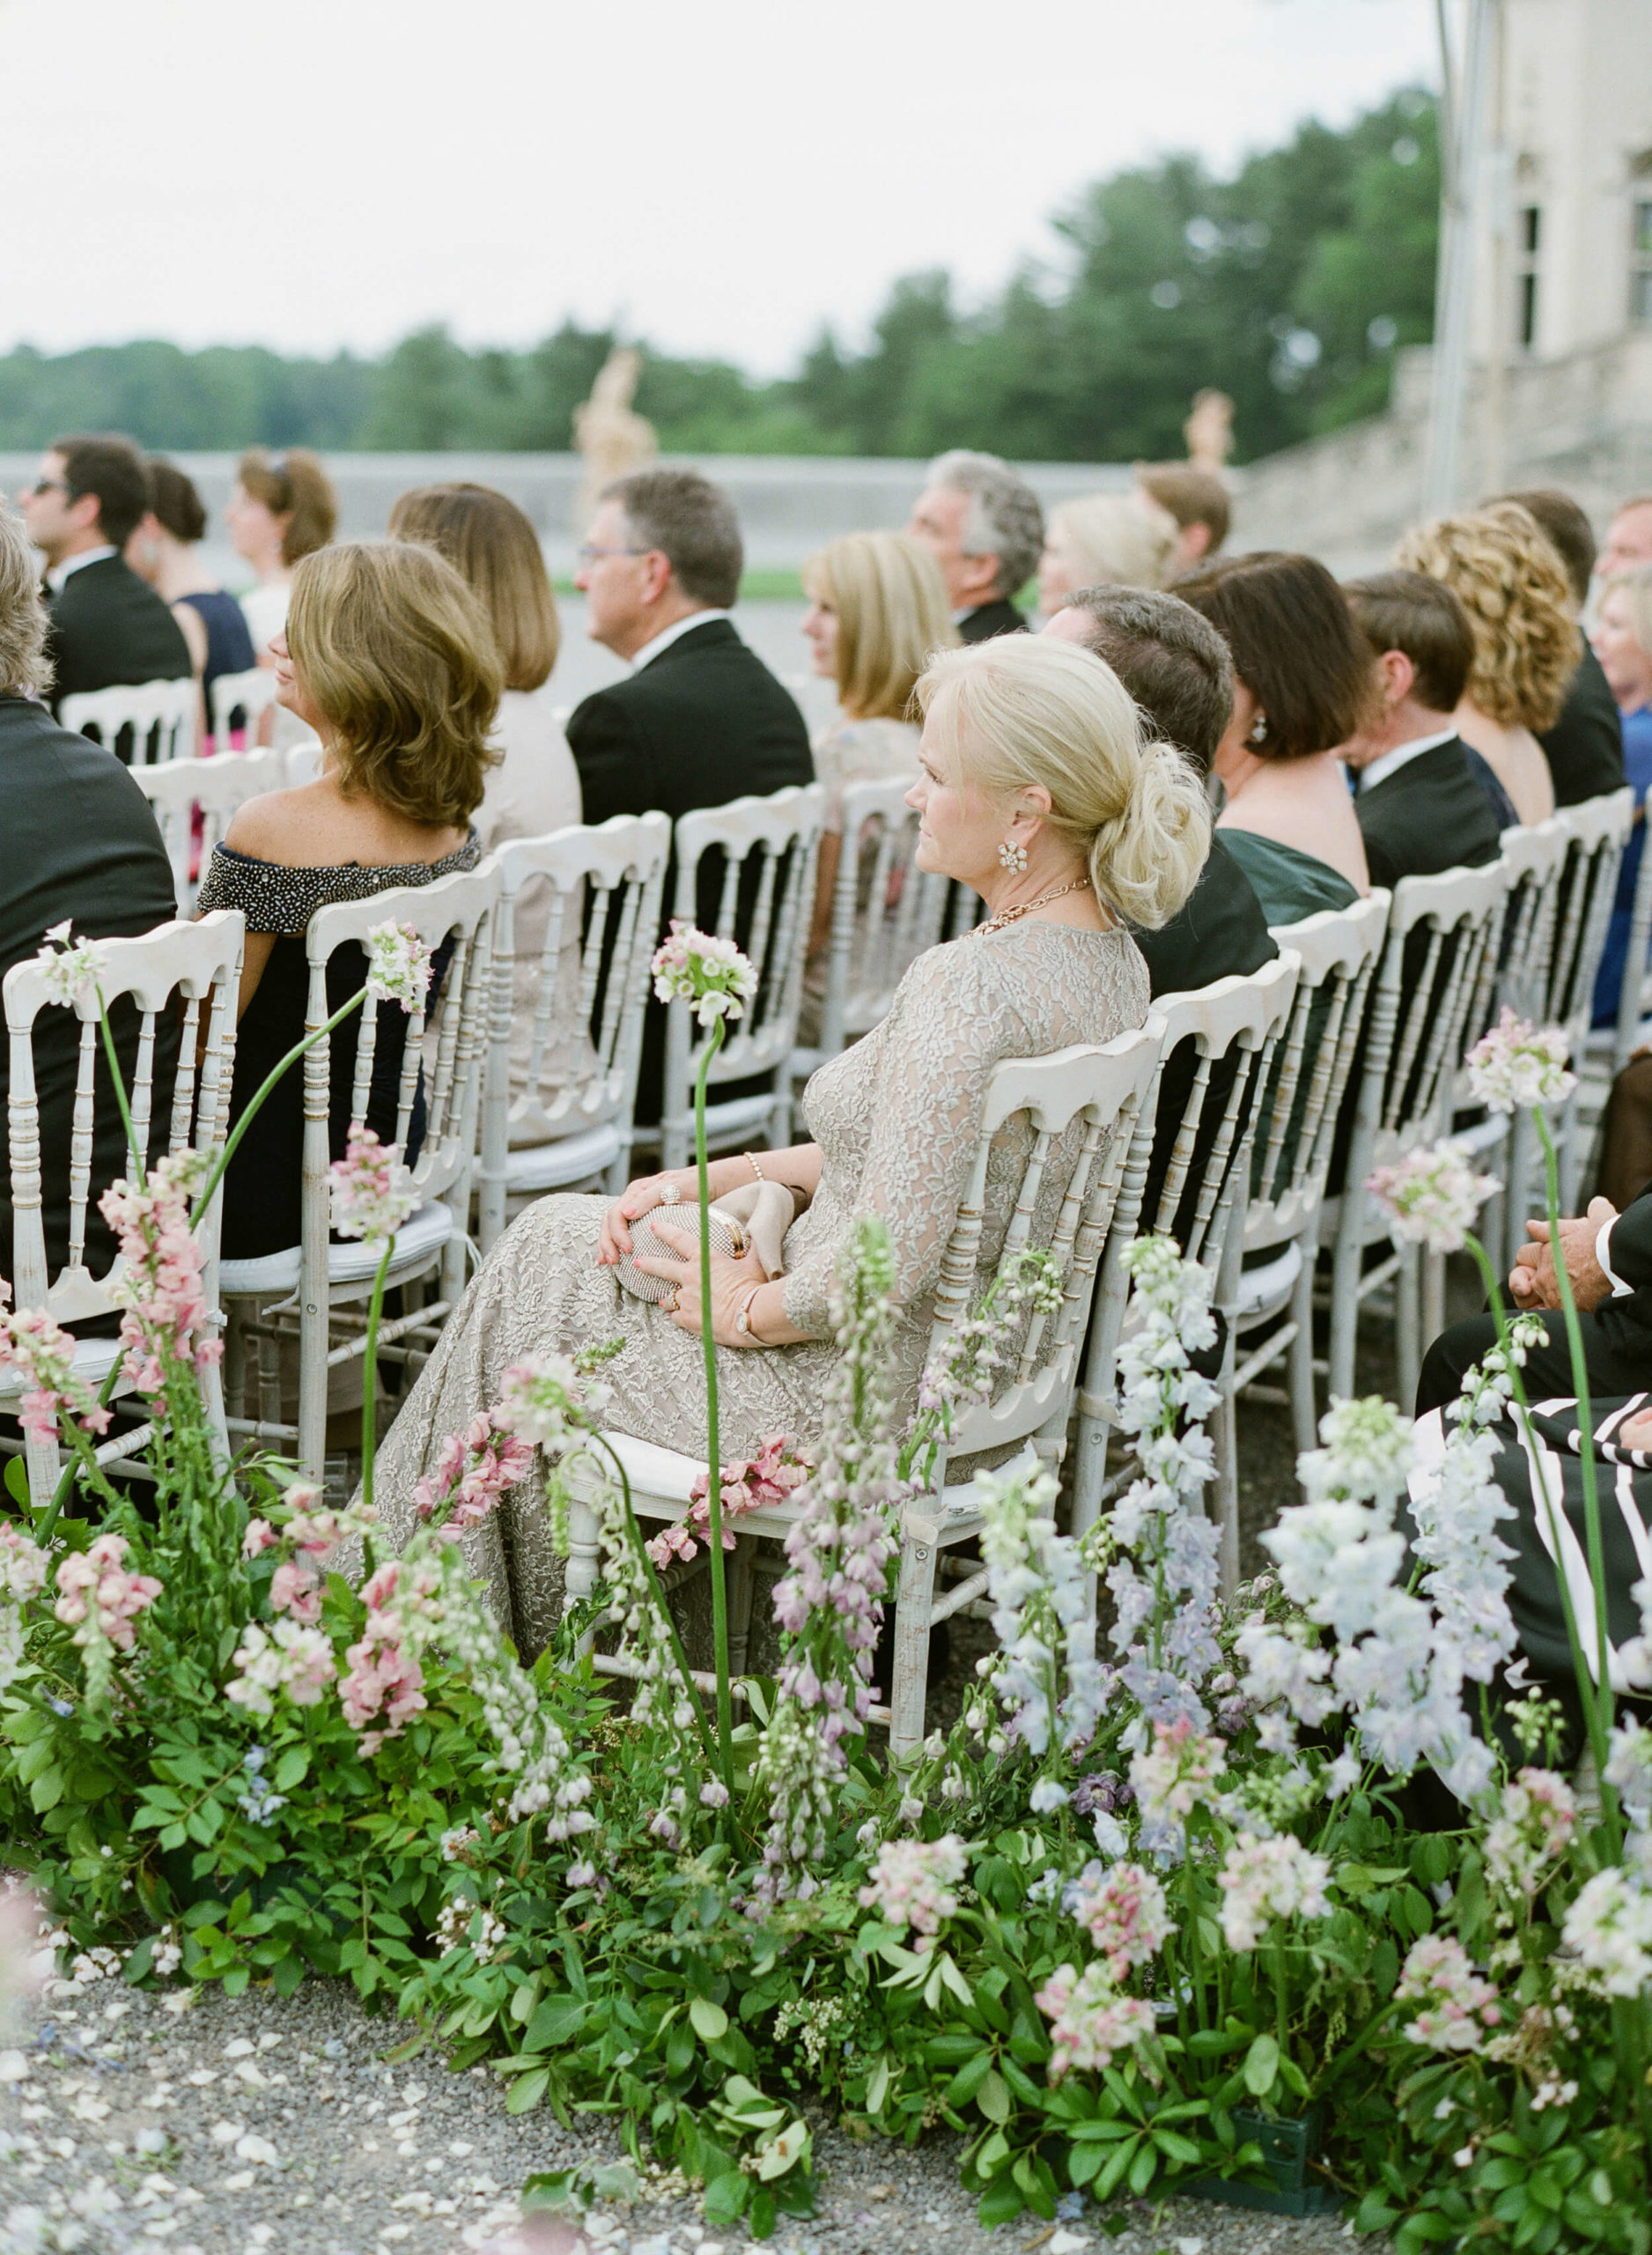 guests in white wooden chairs at outdoor garden wedding ceremony